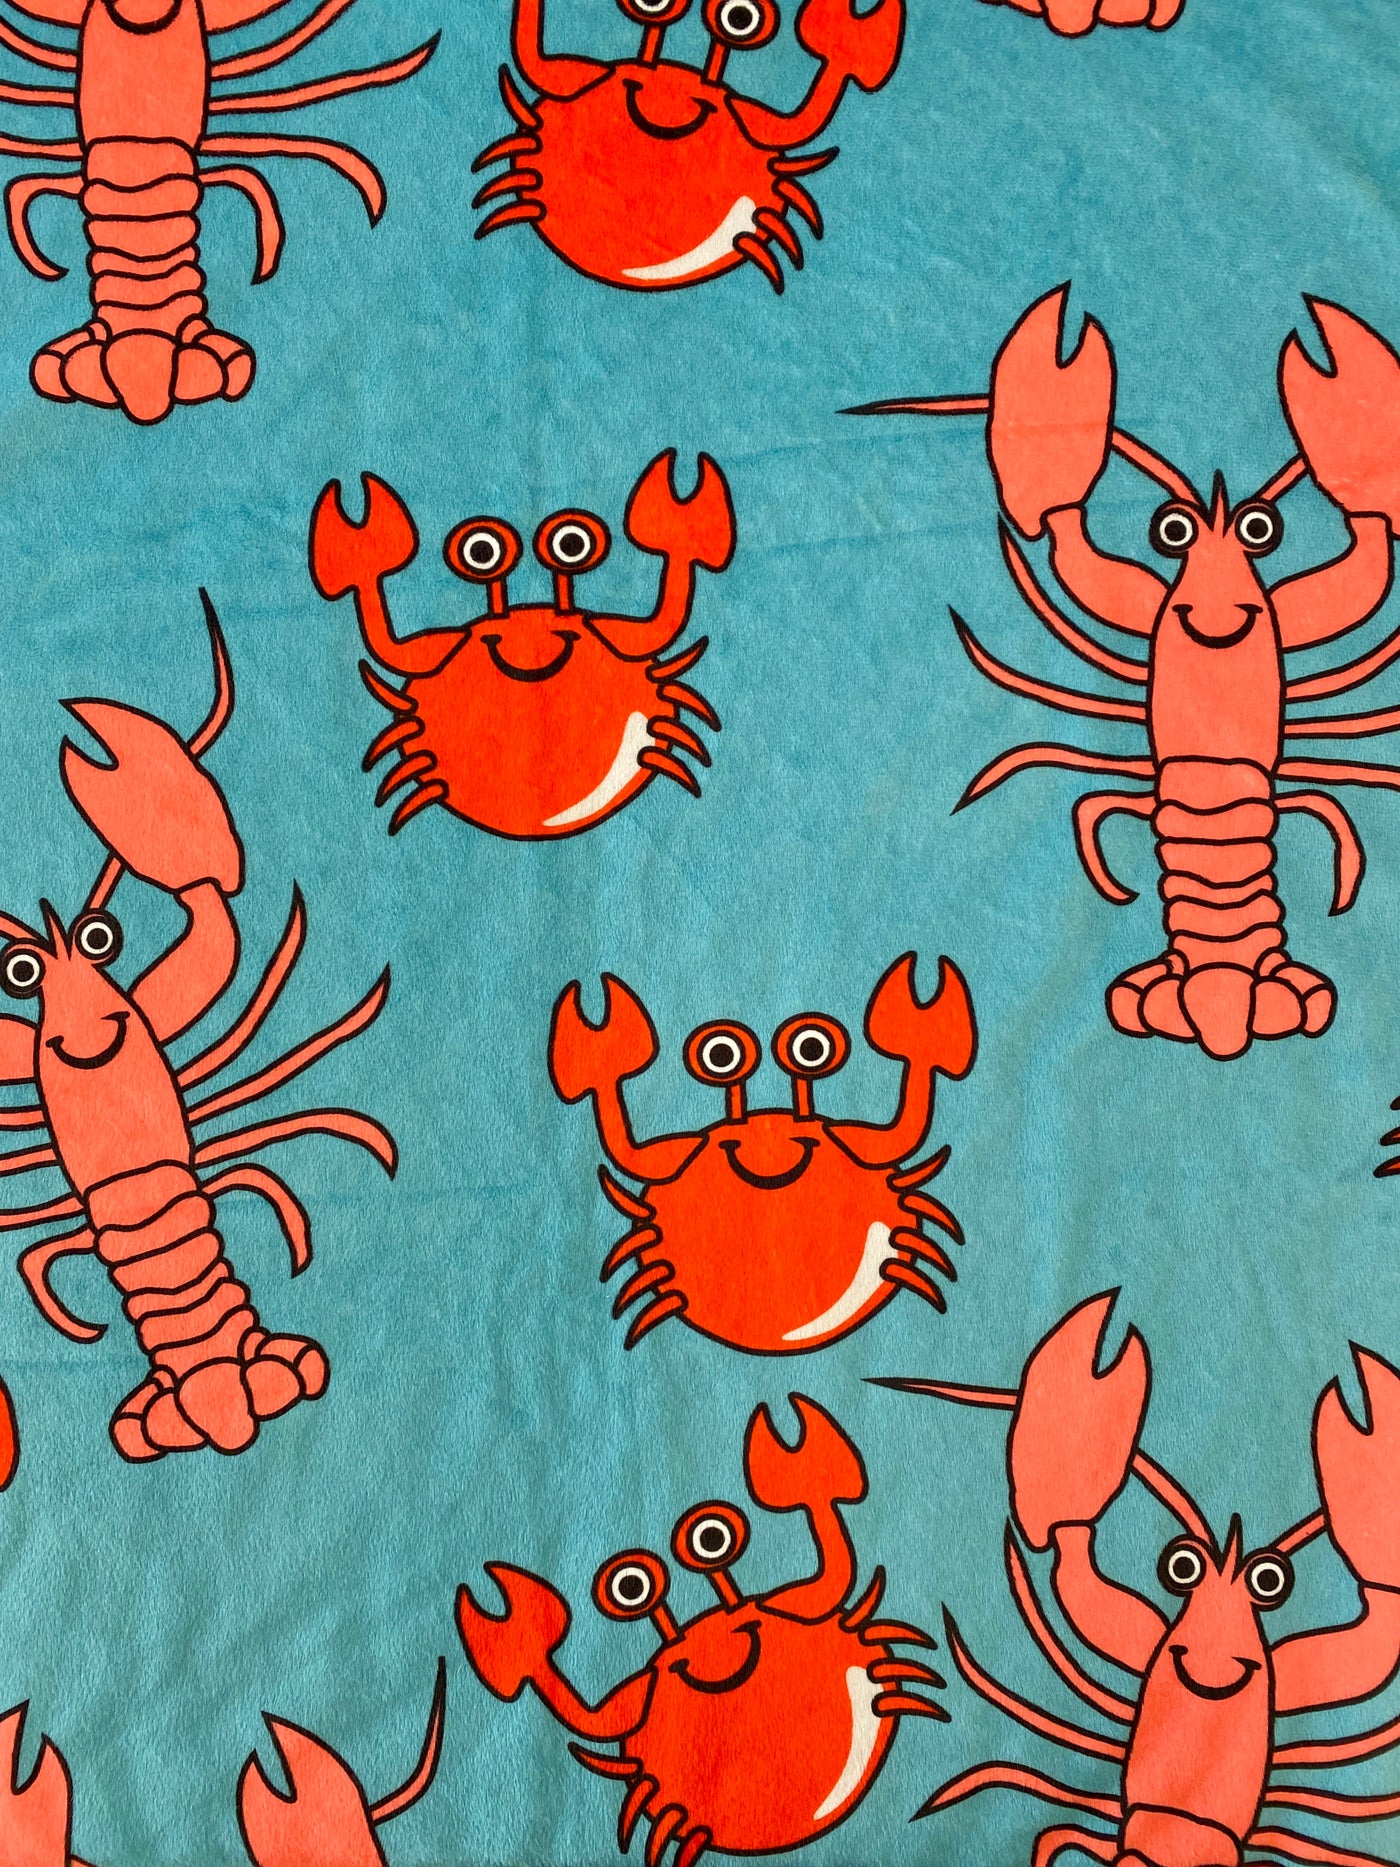 Giant blanket: Lobsters and crabs